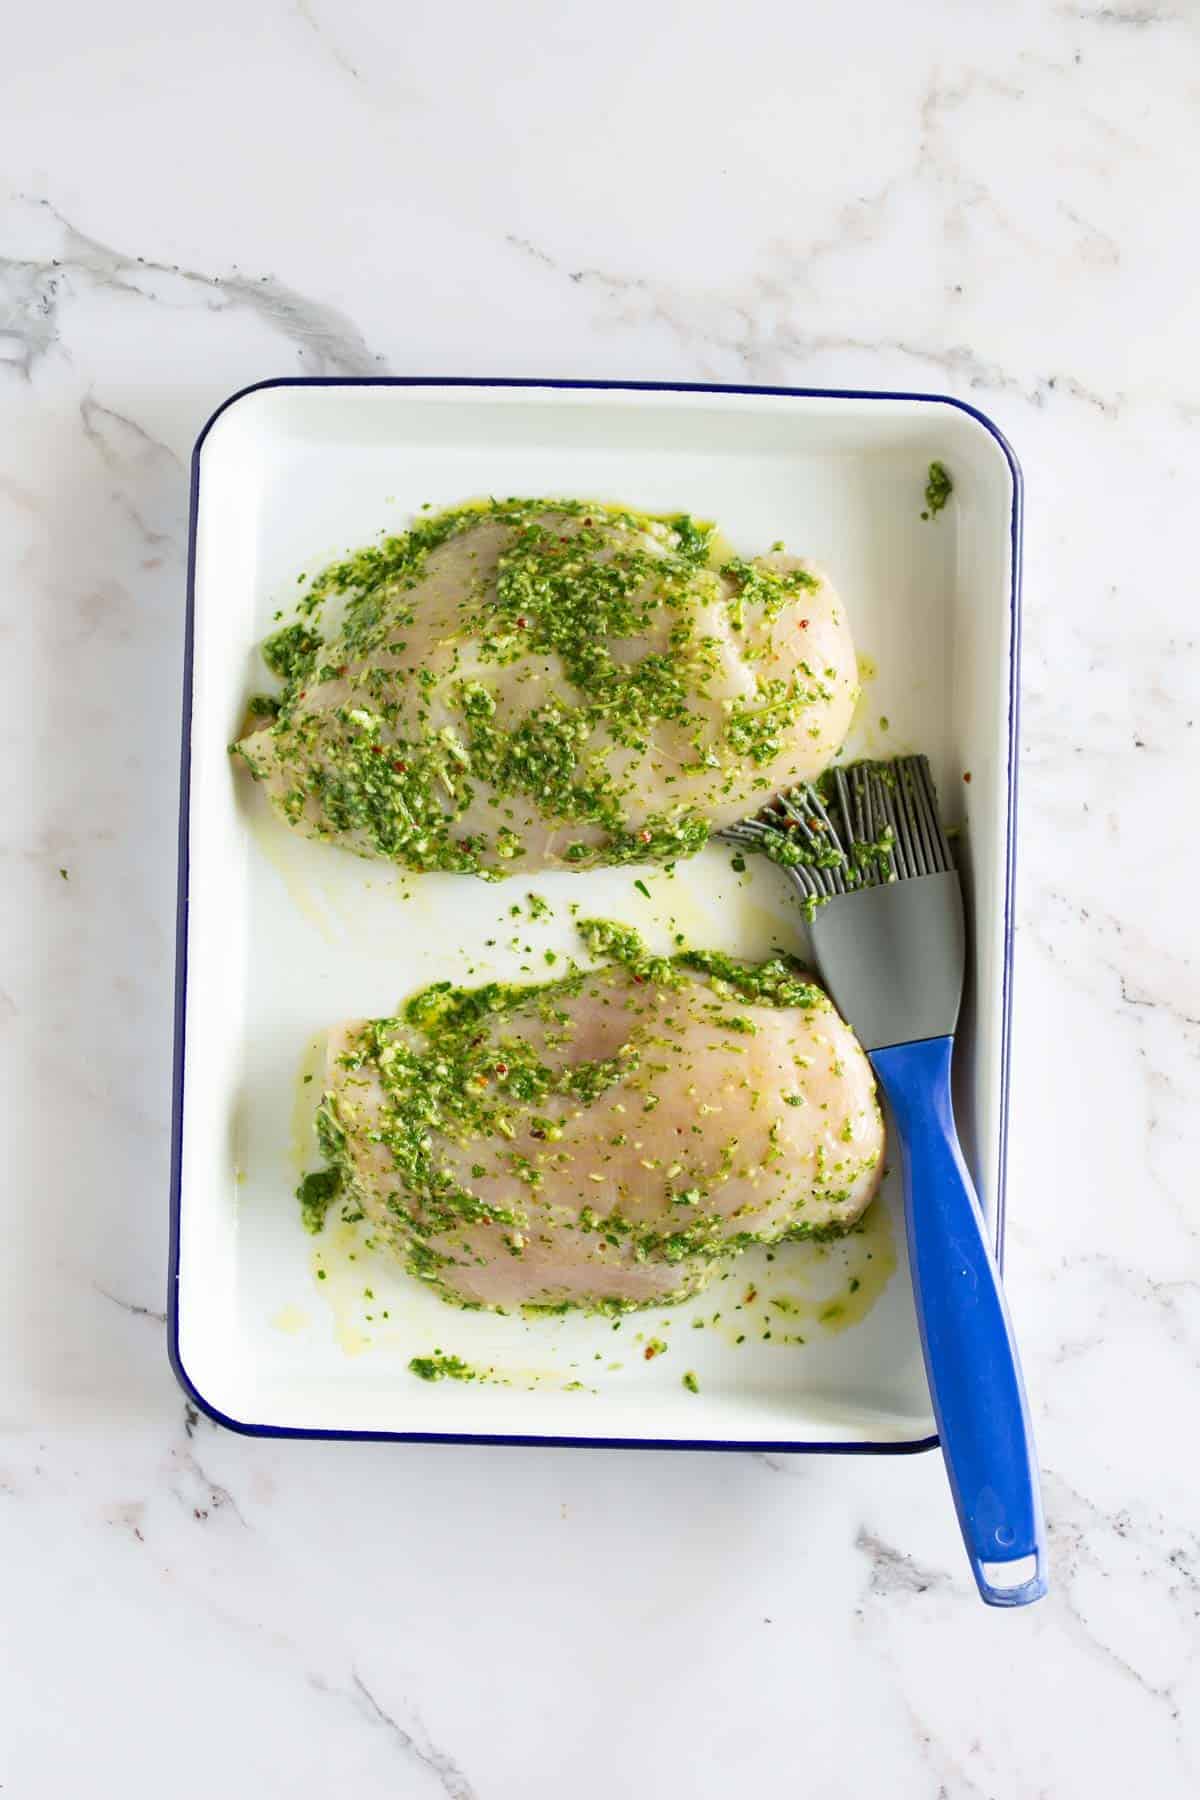 Two raw chicken breasts marinated with green herbs and oil are in a white baking dish. A blue basting brush lies next to the chicken.